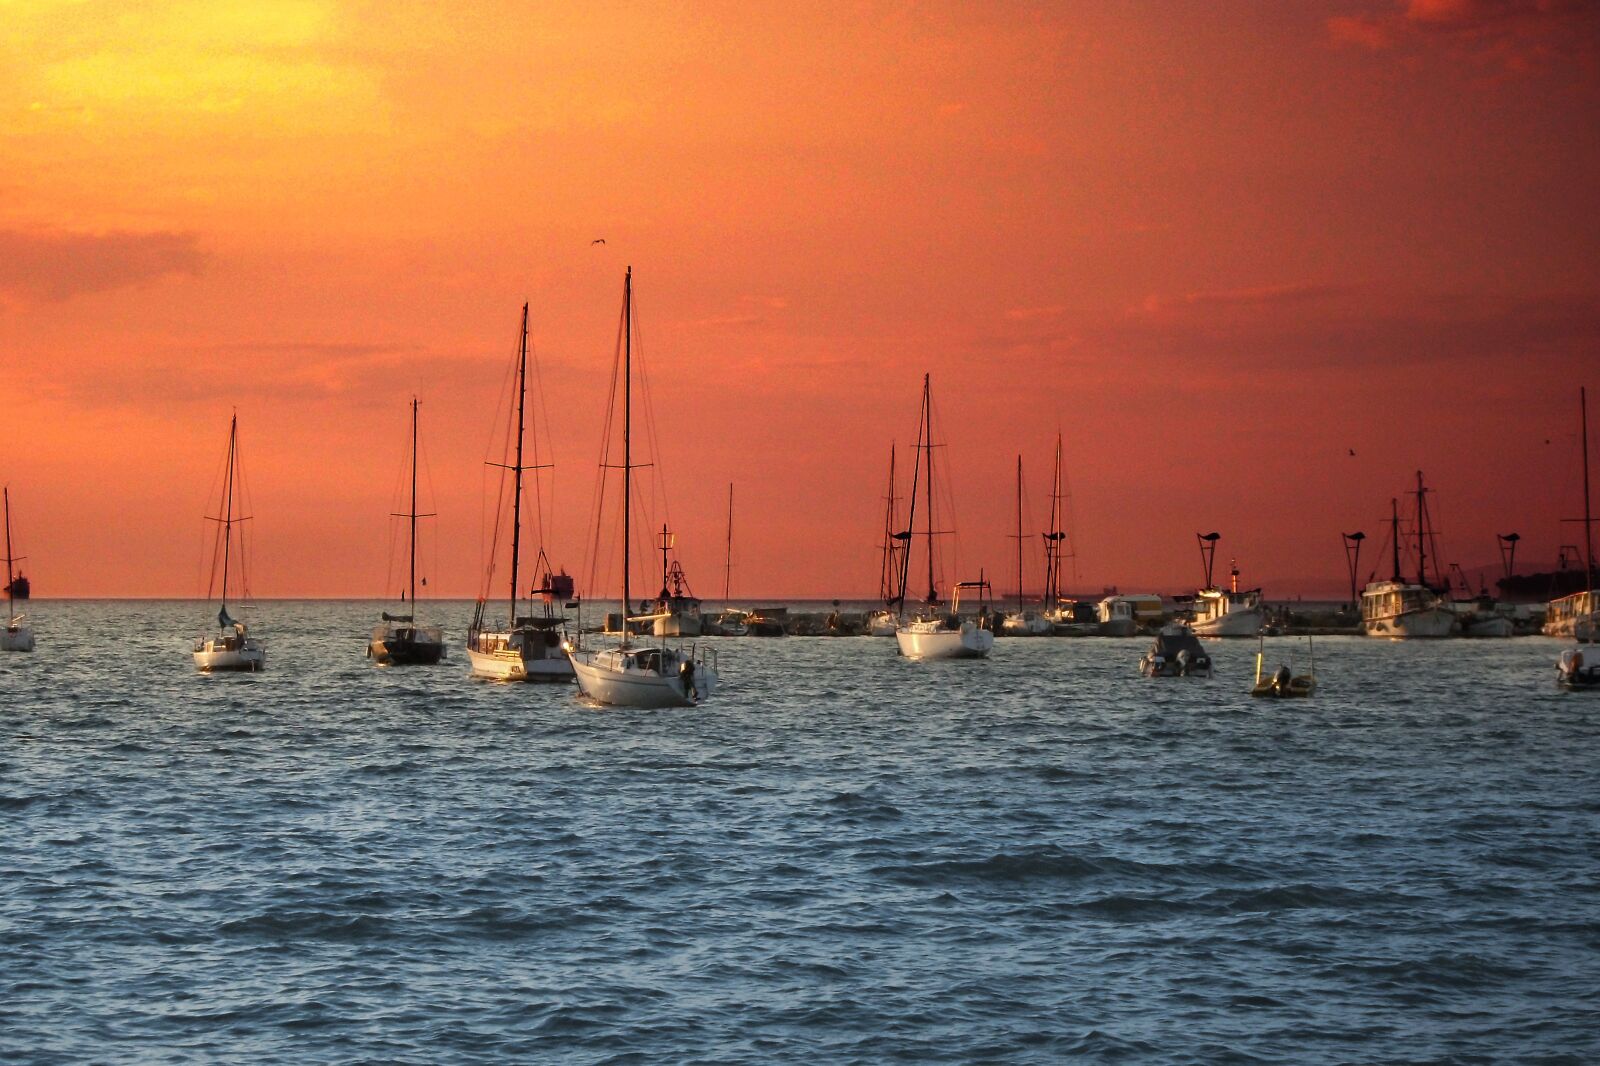 Fujifilm A170 A180 sample photo. Sailing boats, sunset, red photography